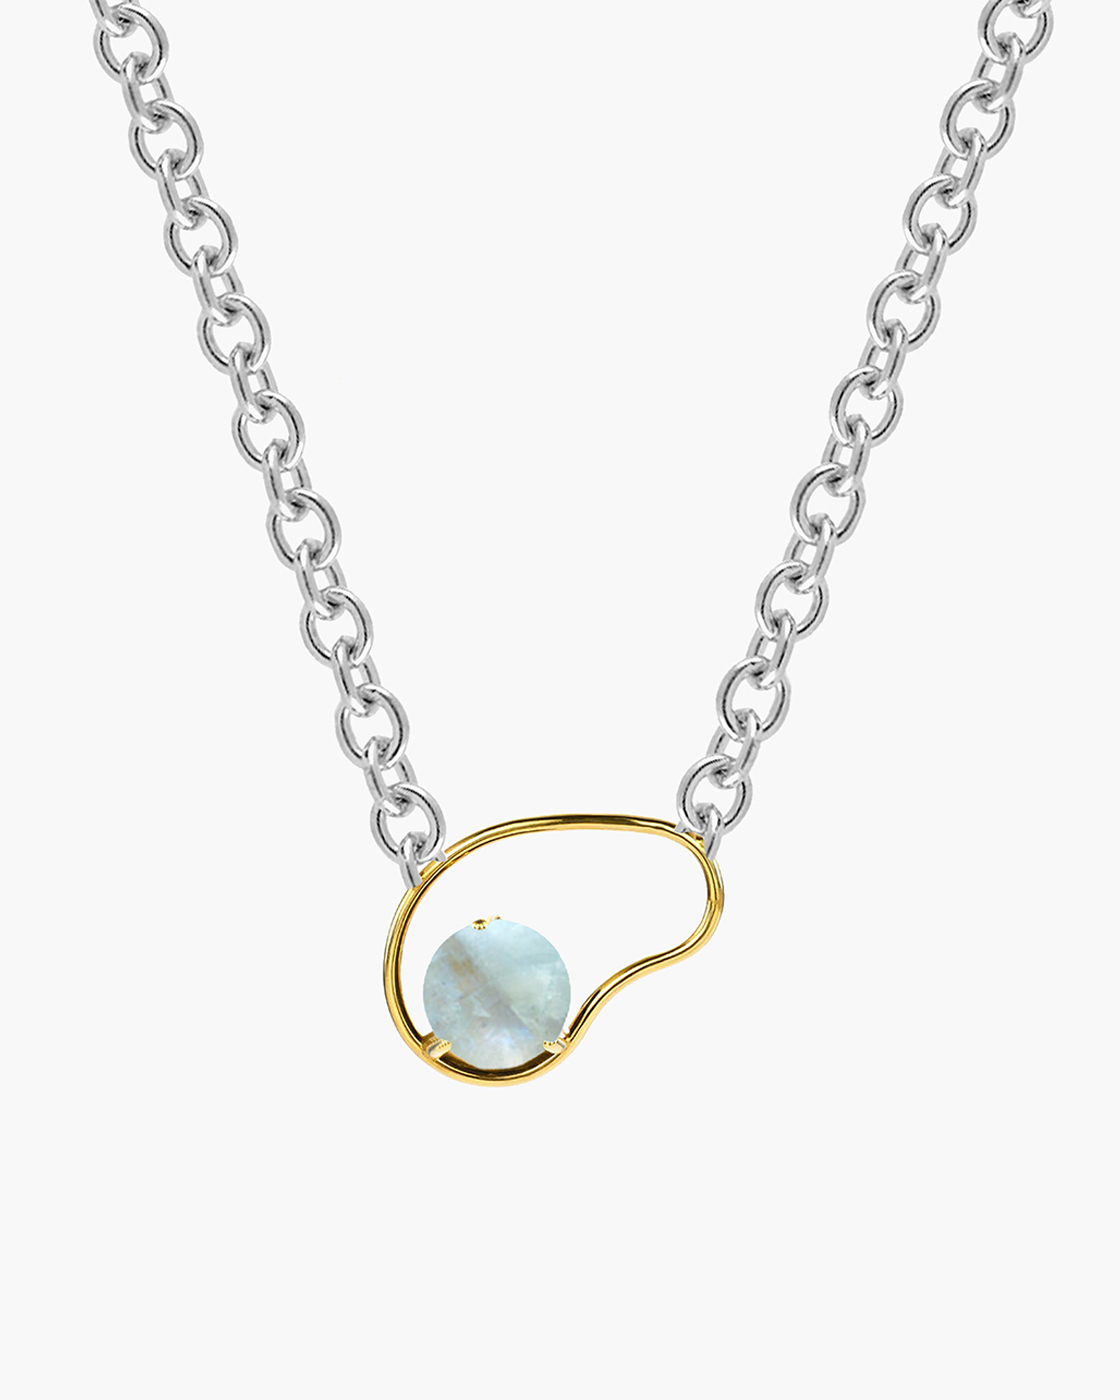 Neon Big Gold and Silver Moonstone Necklace